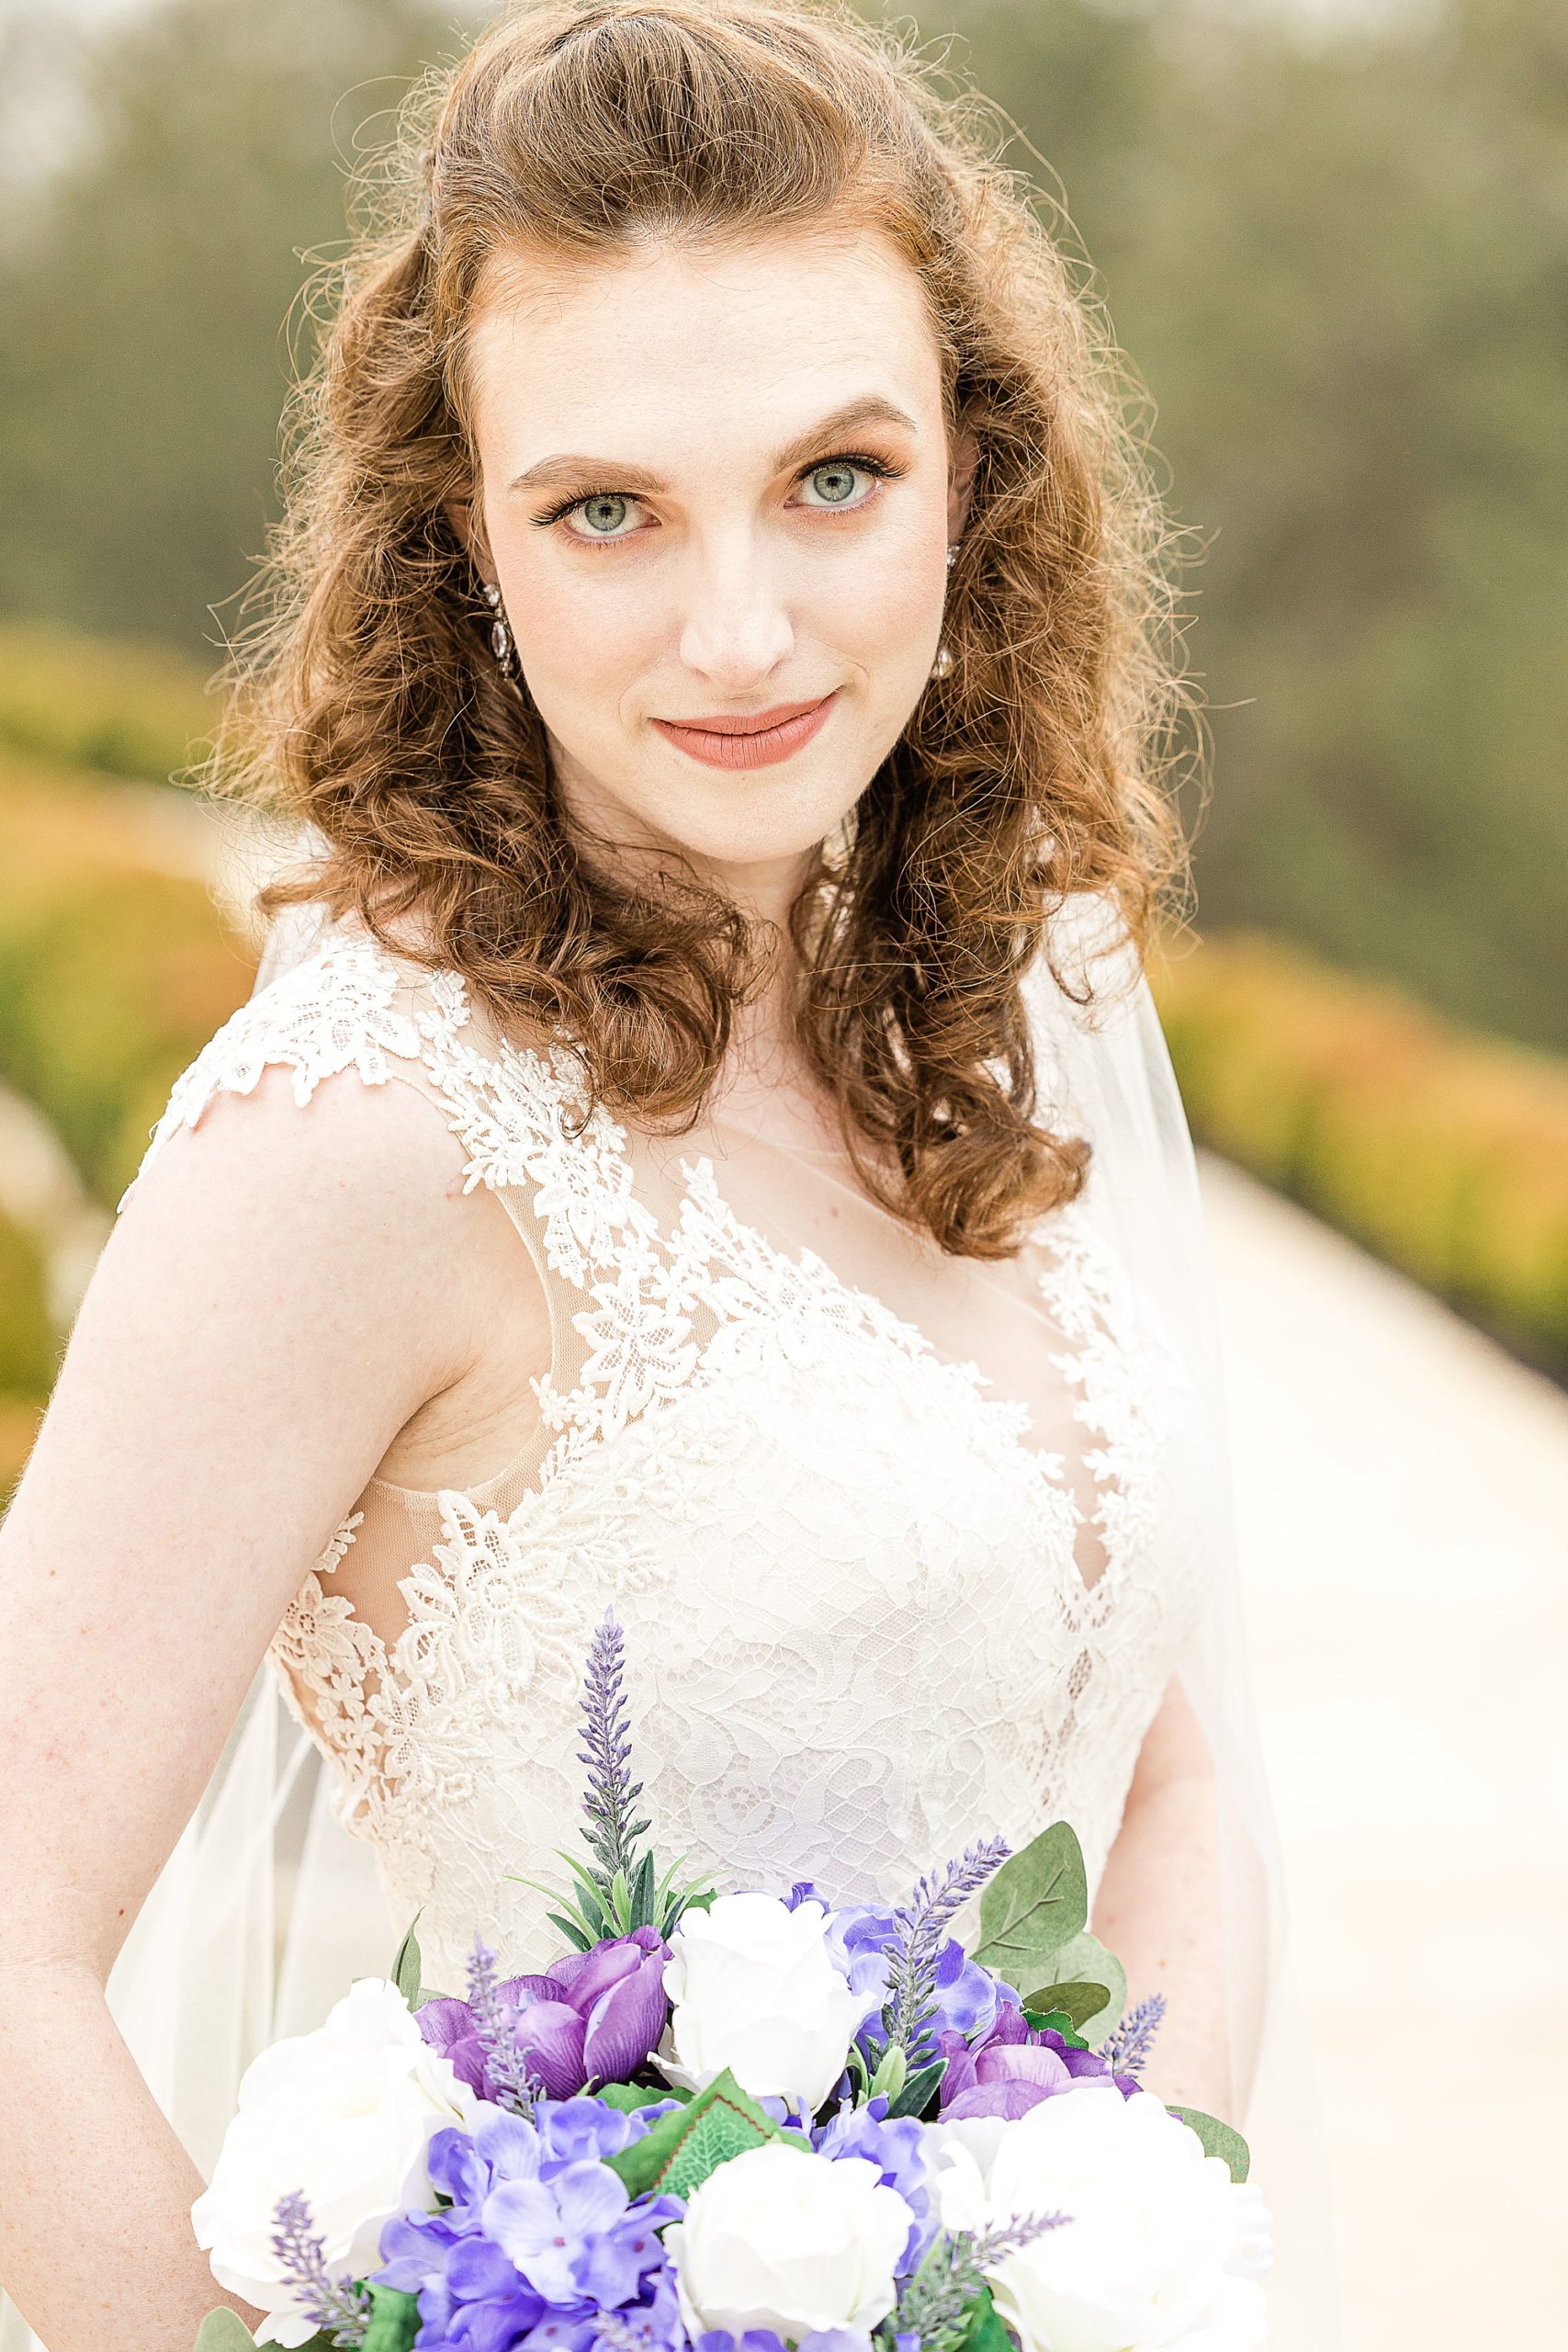 bride with bouquet of purple flowers smiles at camera